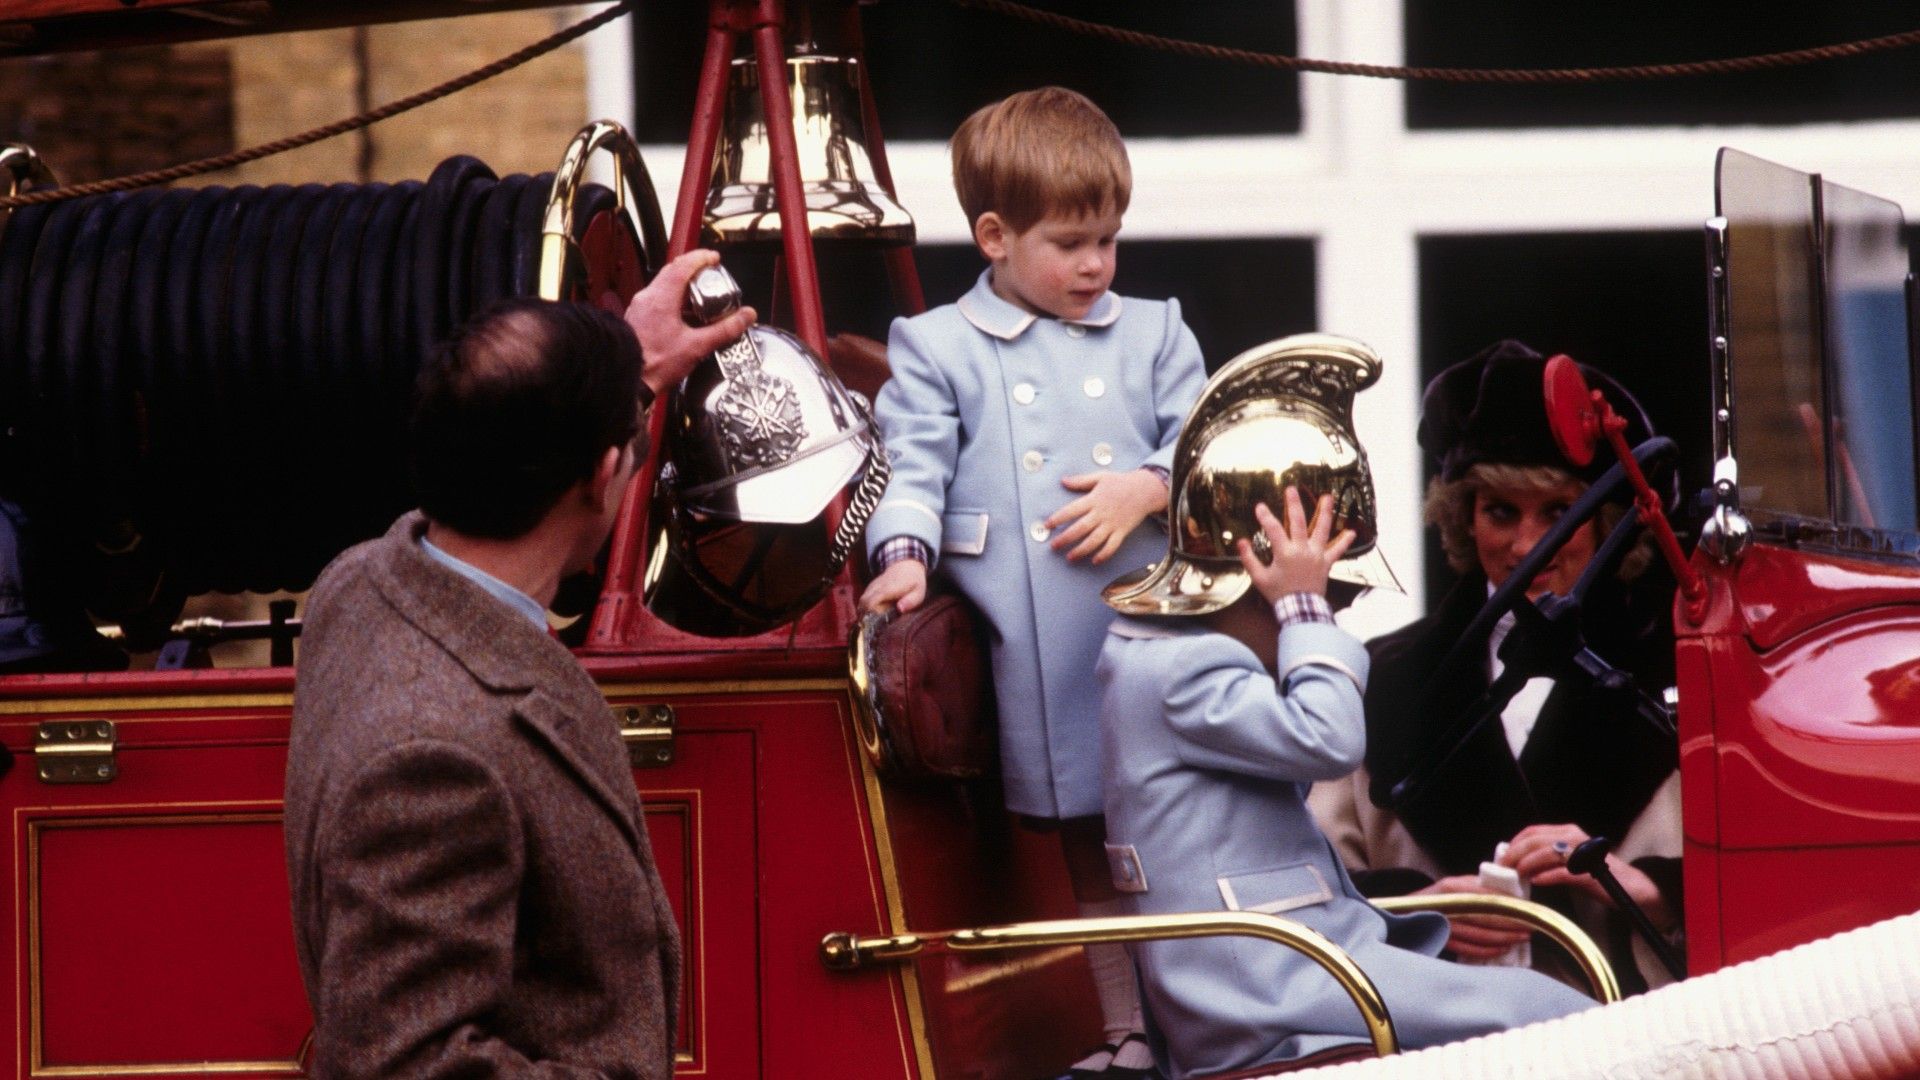 <p>                     Dressed in matching periwinkle blue coats, a young Prince William and Harry are snapped playing on a vintage fire engine on the Sandringham Estate in Norfolk in 1988.                   </p>                                      <p>                     Both look fascinated by the vintage vehicle as their father, King Charles, watches over his curious sons.                   </p>